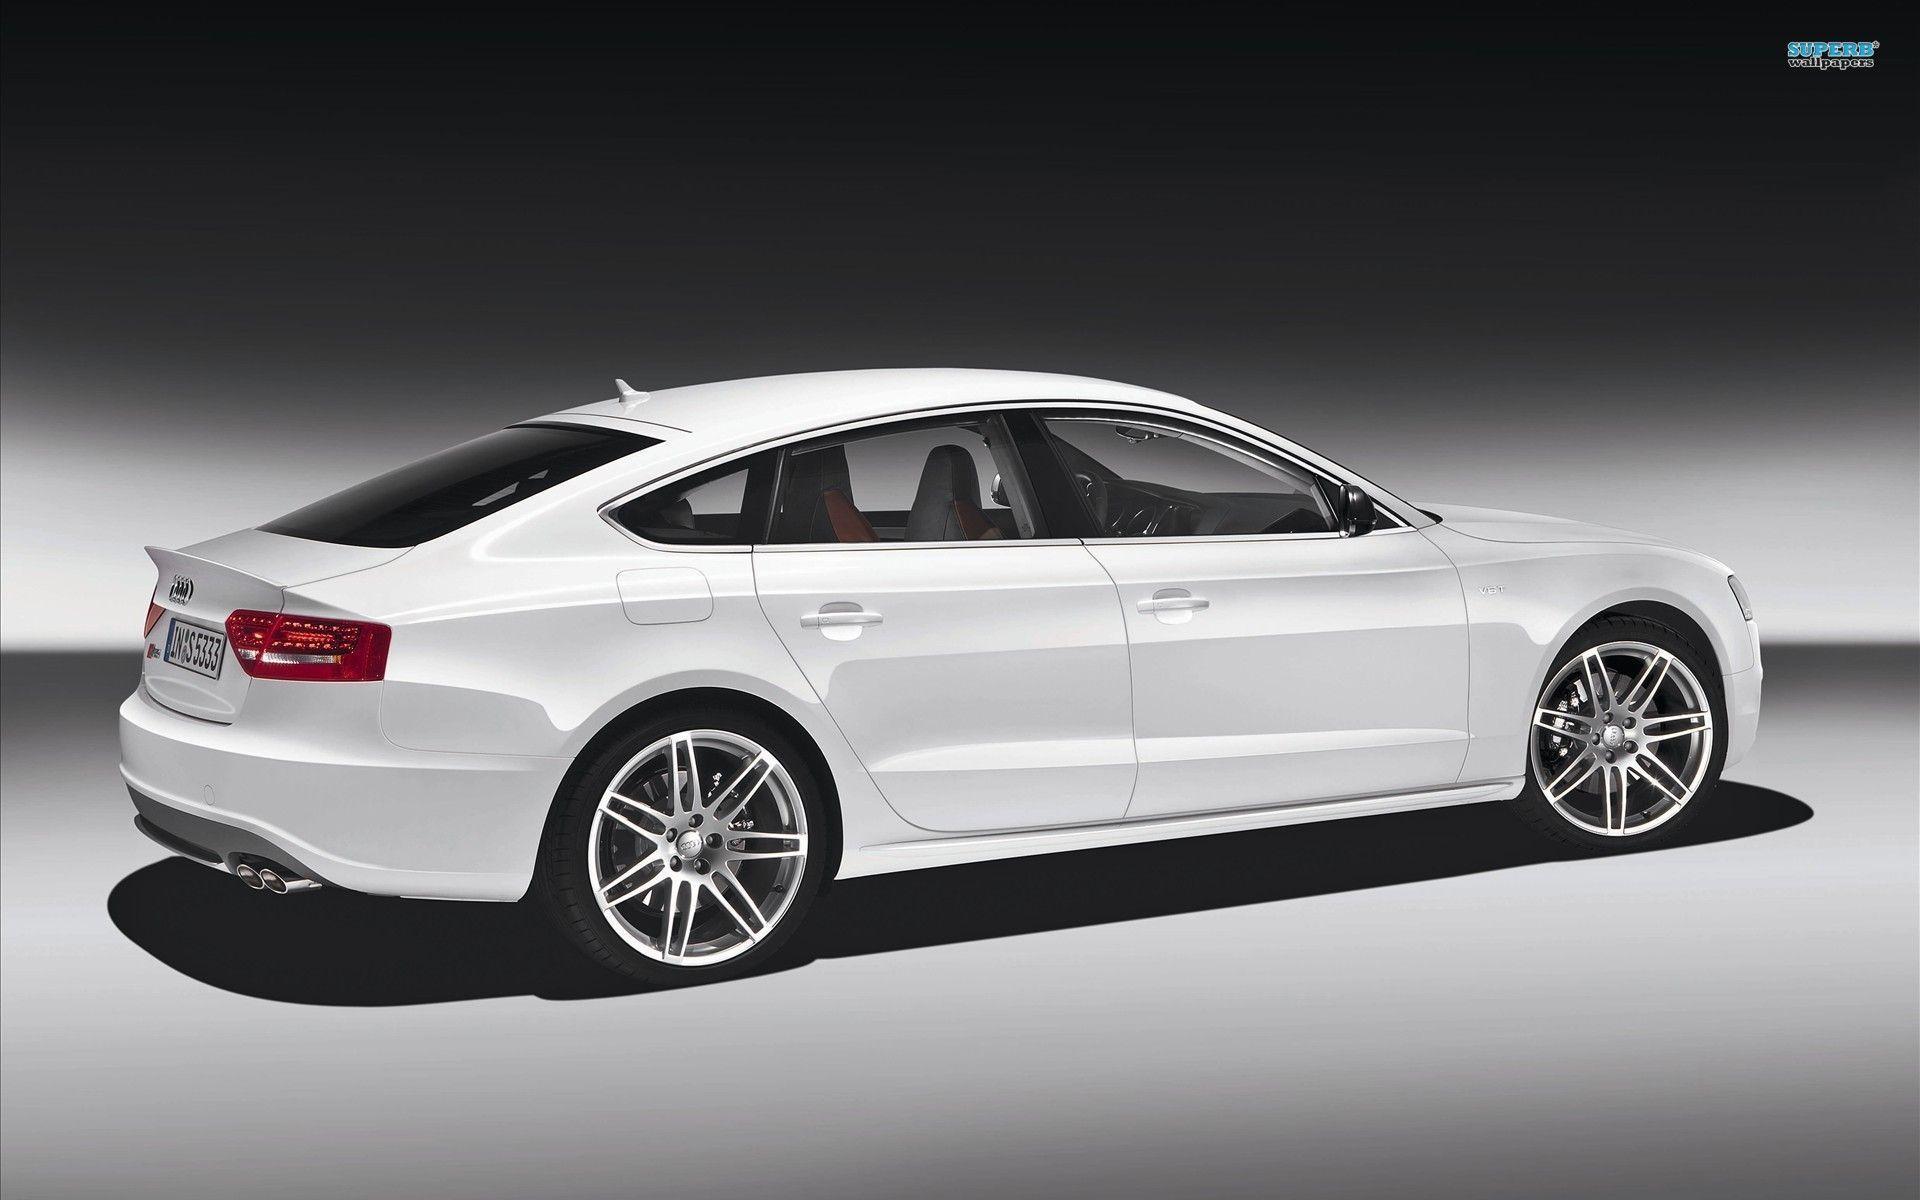 Audi A5 Hd Wallpapers Free Download